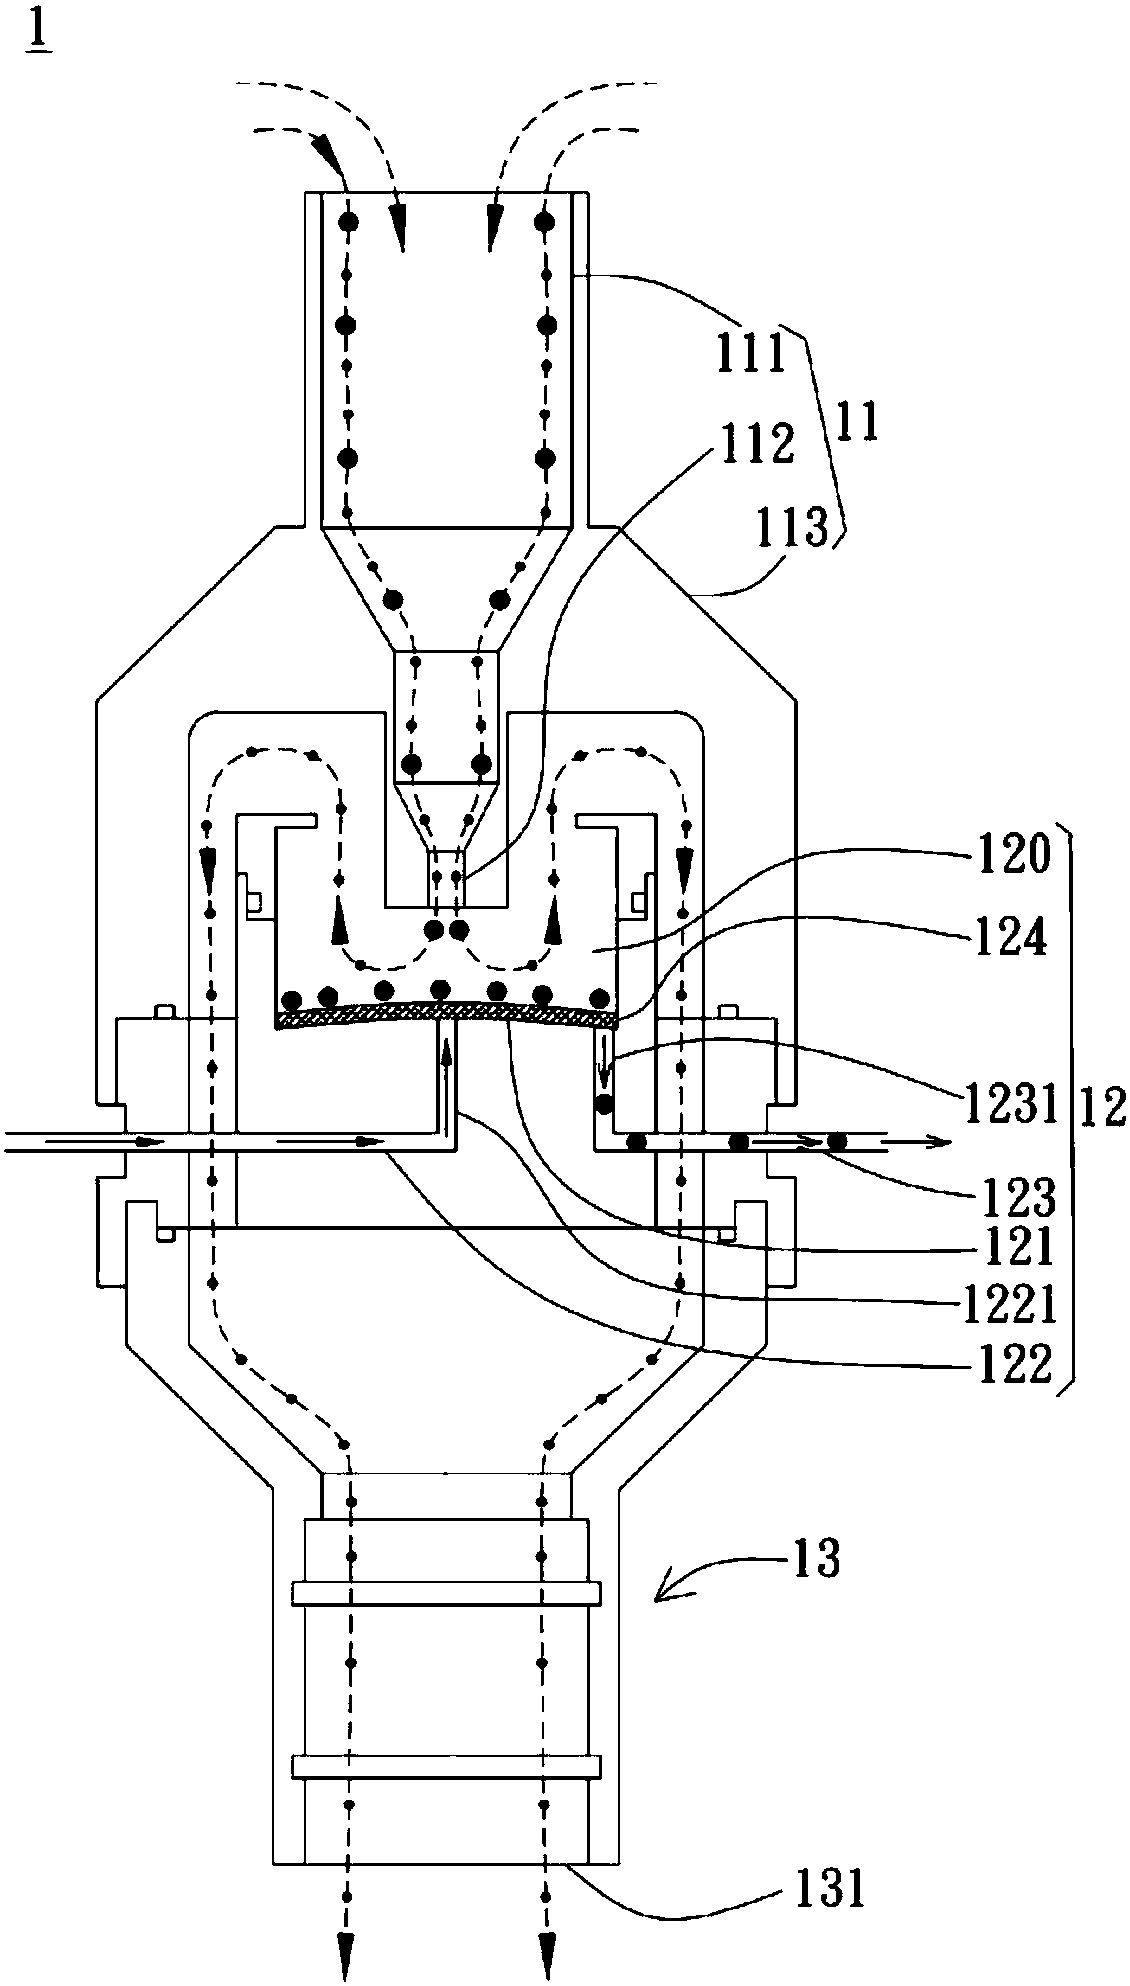 Inertial impactor with wetted impaction surface to prevent particle loading effect